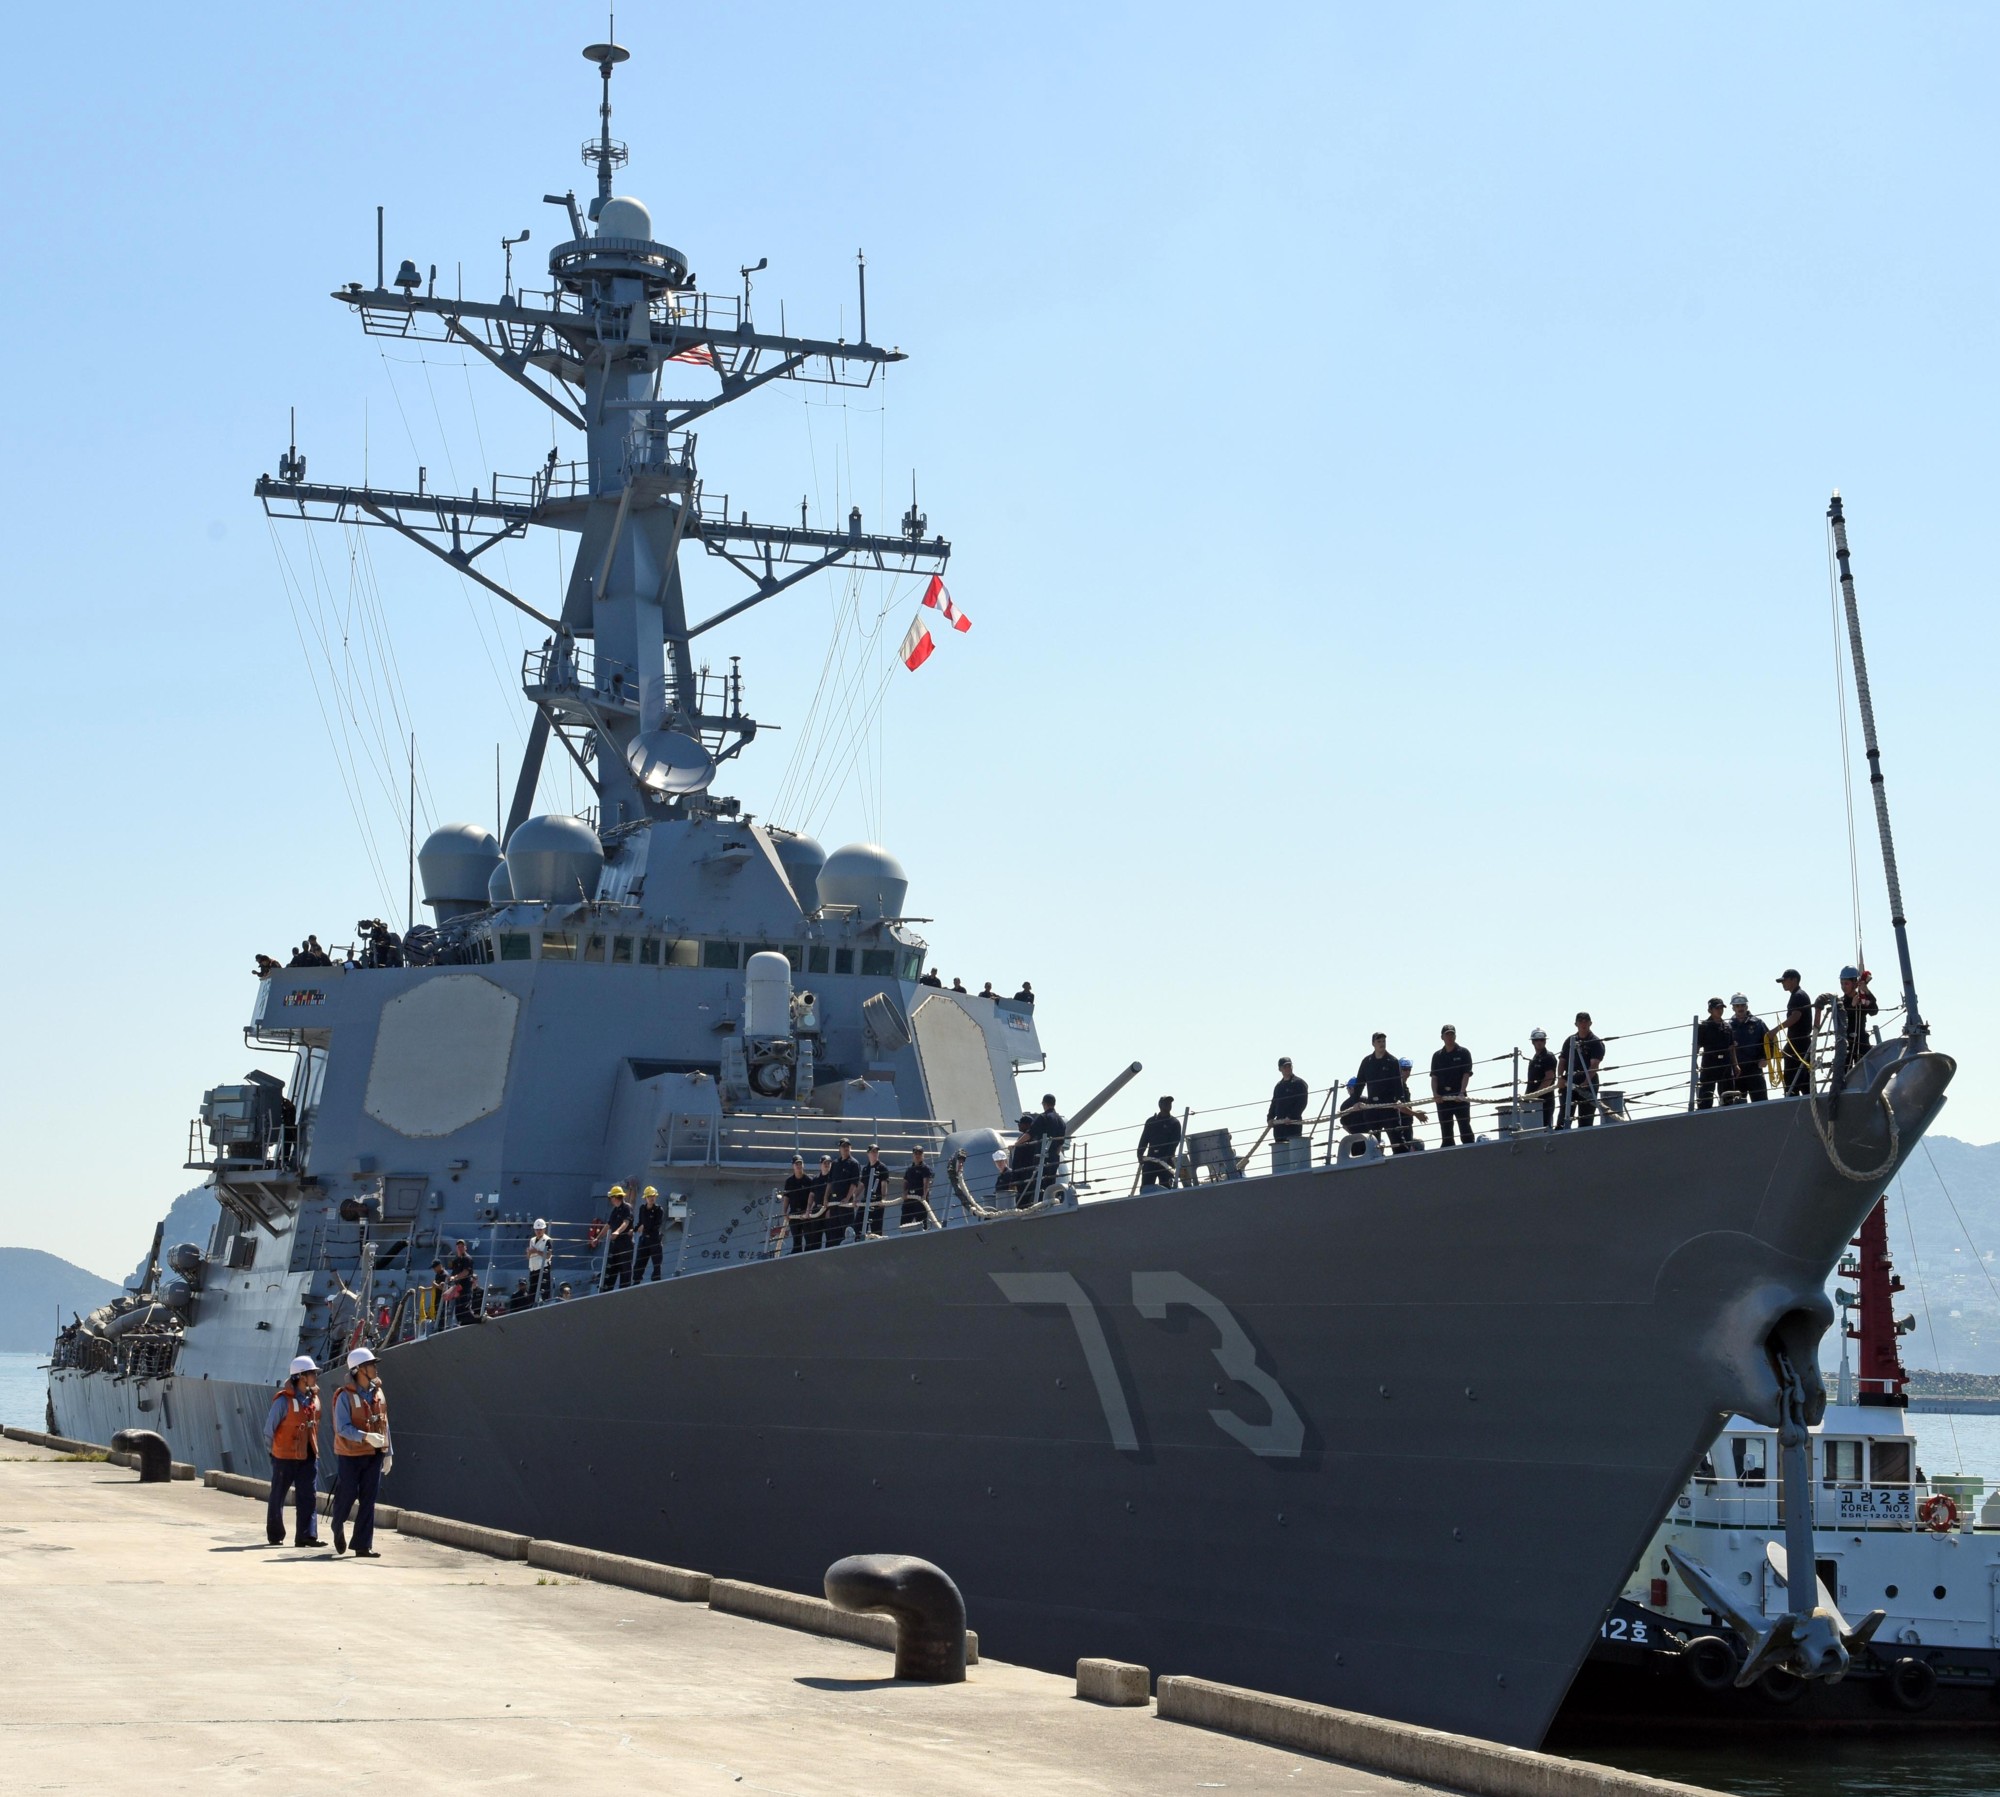 ddg-73 uss decatur guided missile destroyer arleigh burke class aegis bmd 16